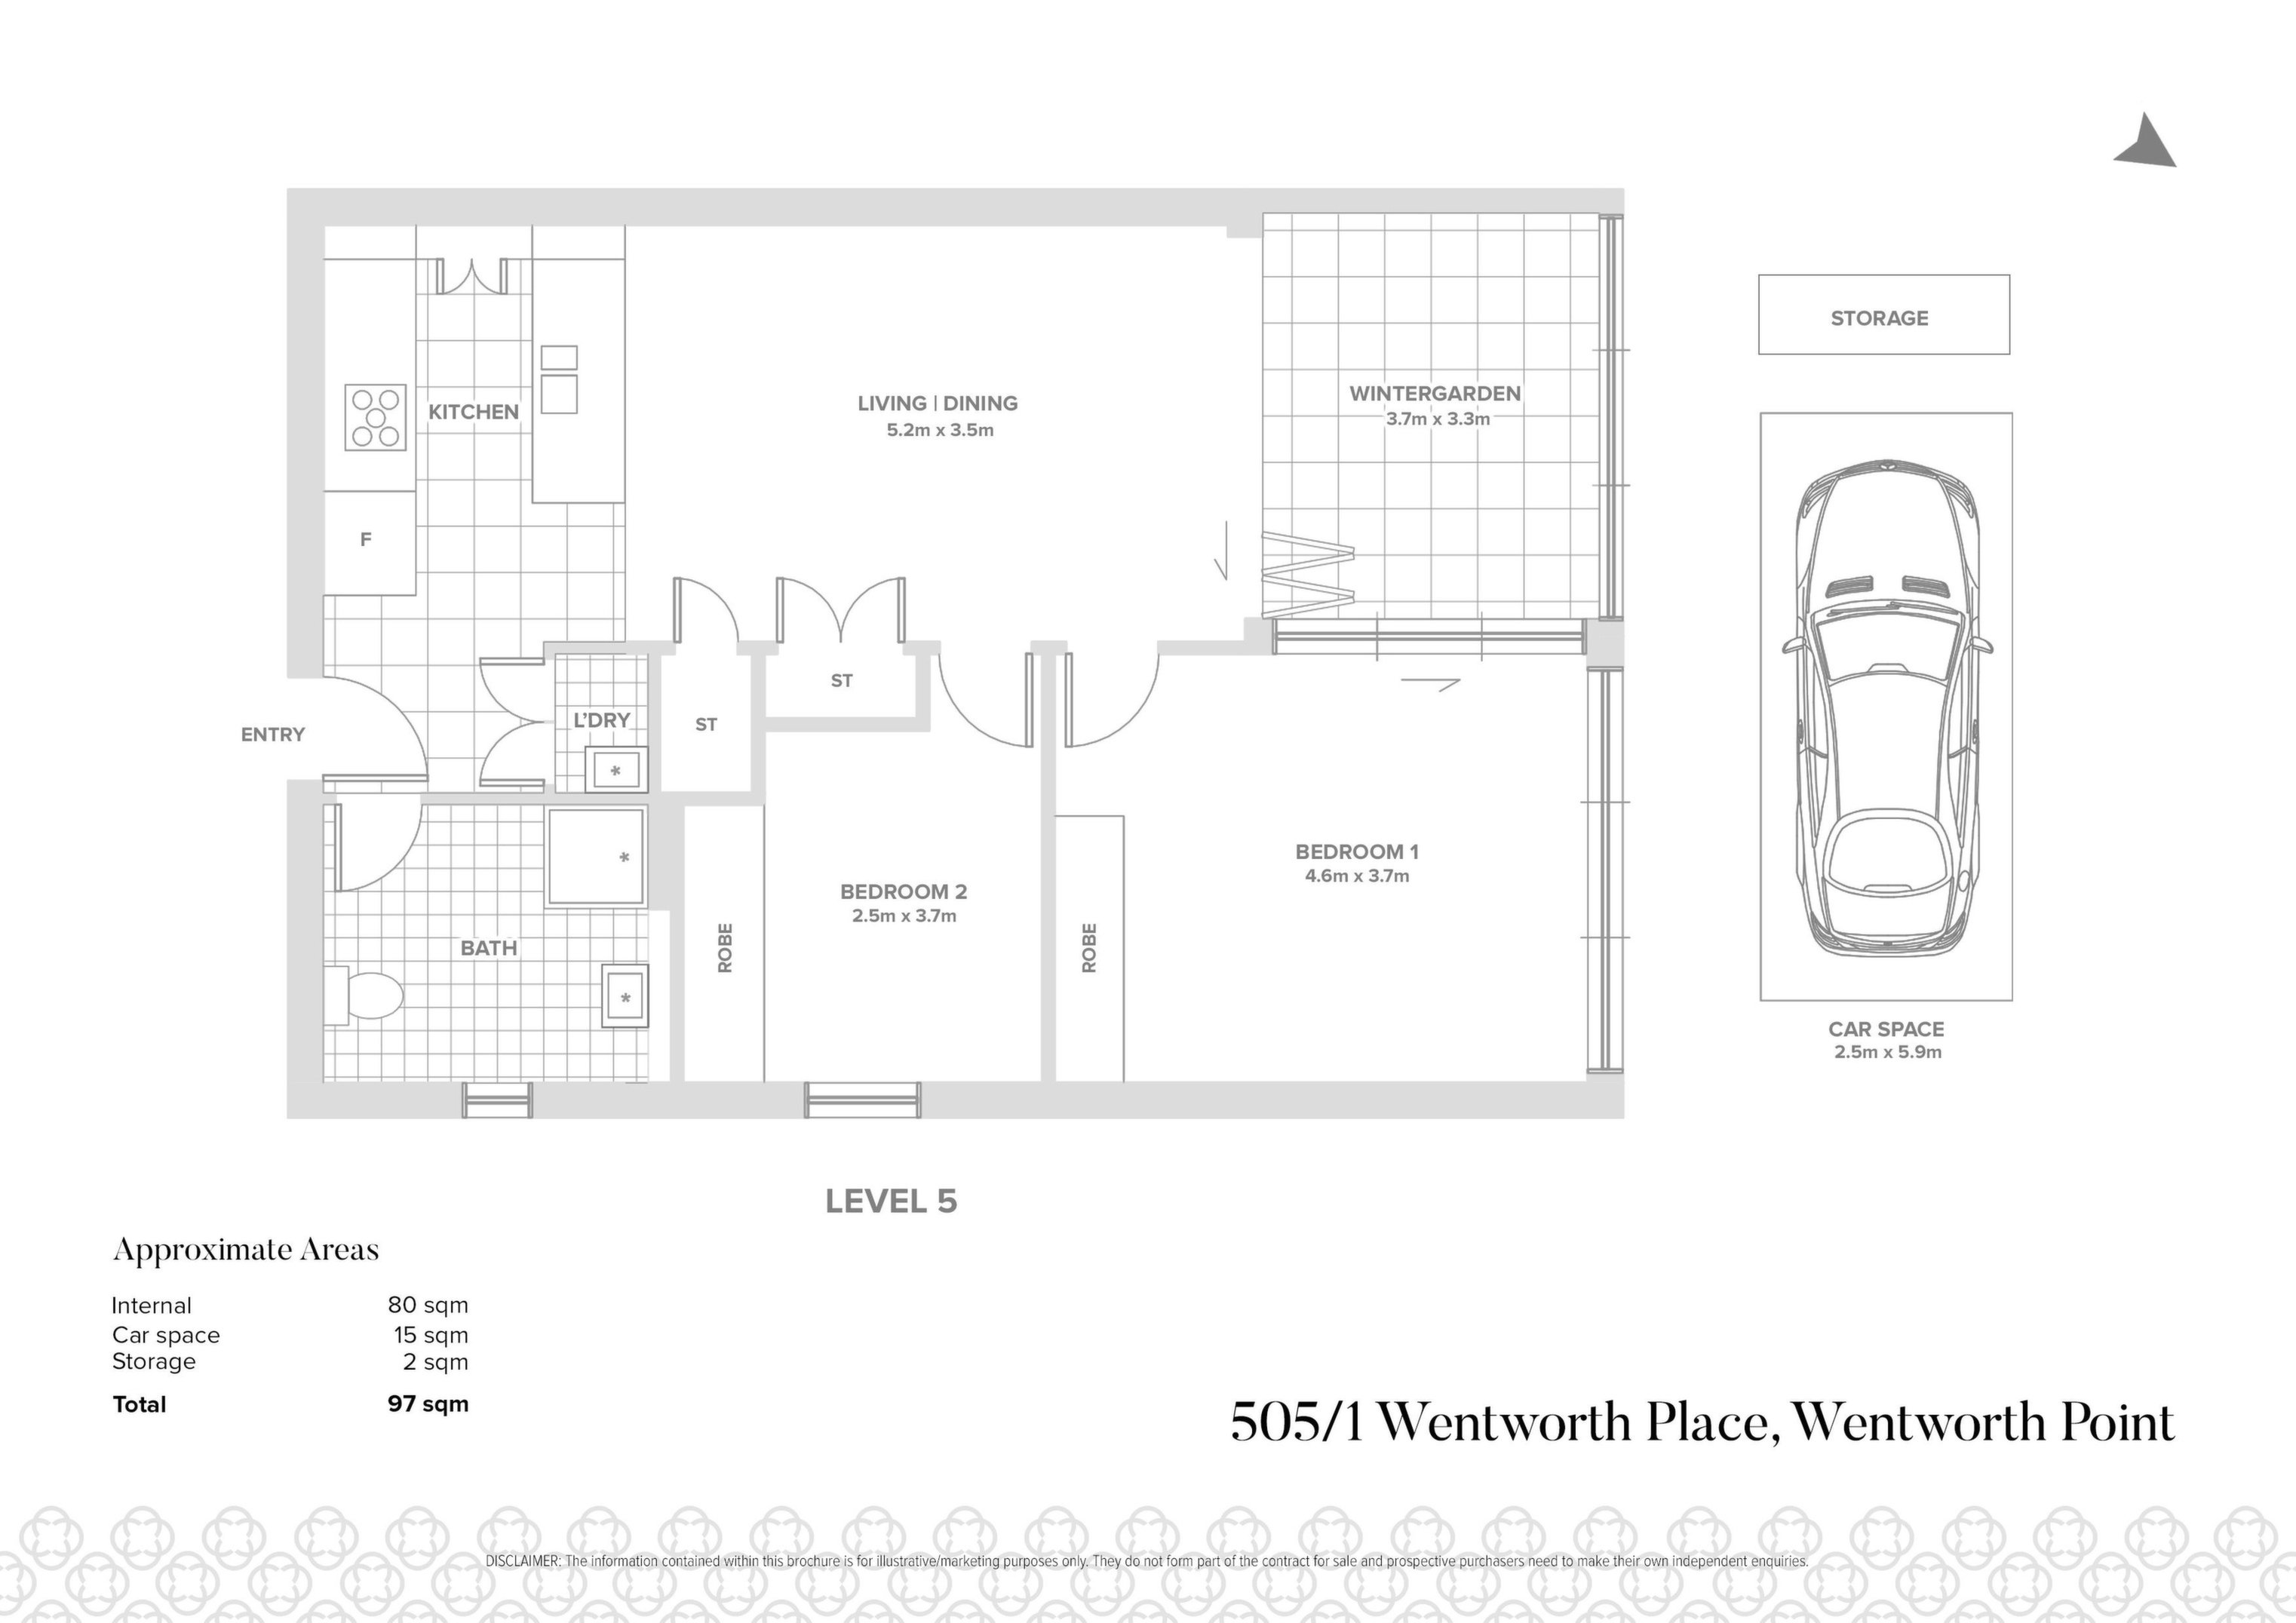 505/1 Wentworth Place, Wentworth Point Sold by Chidiac Realty - floorplan